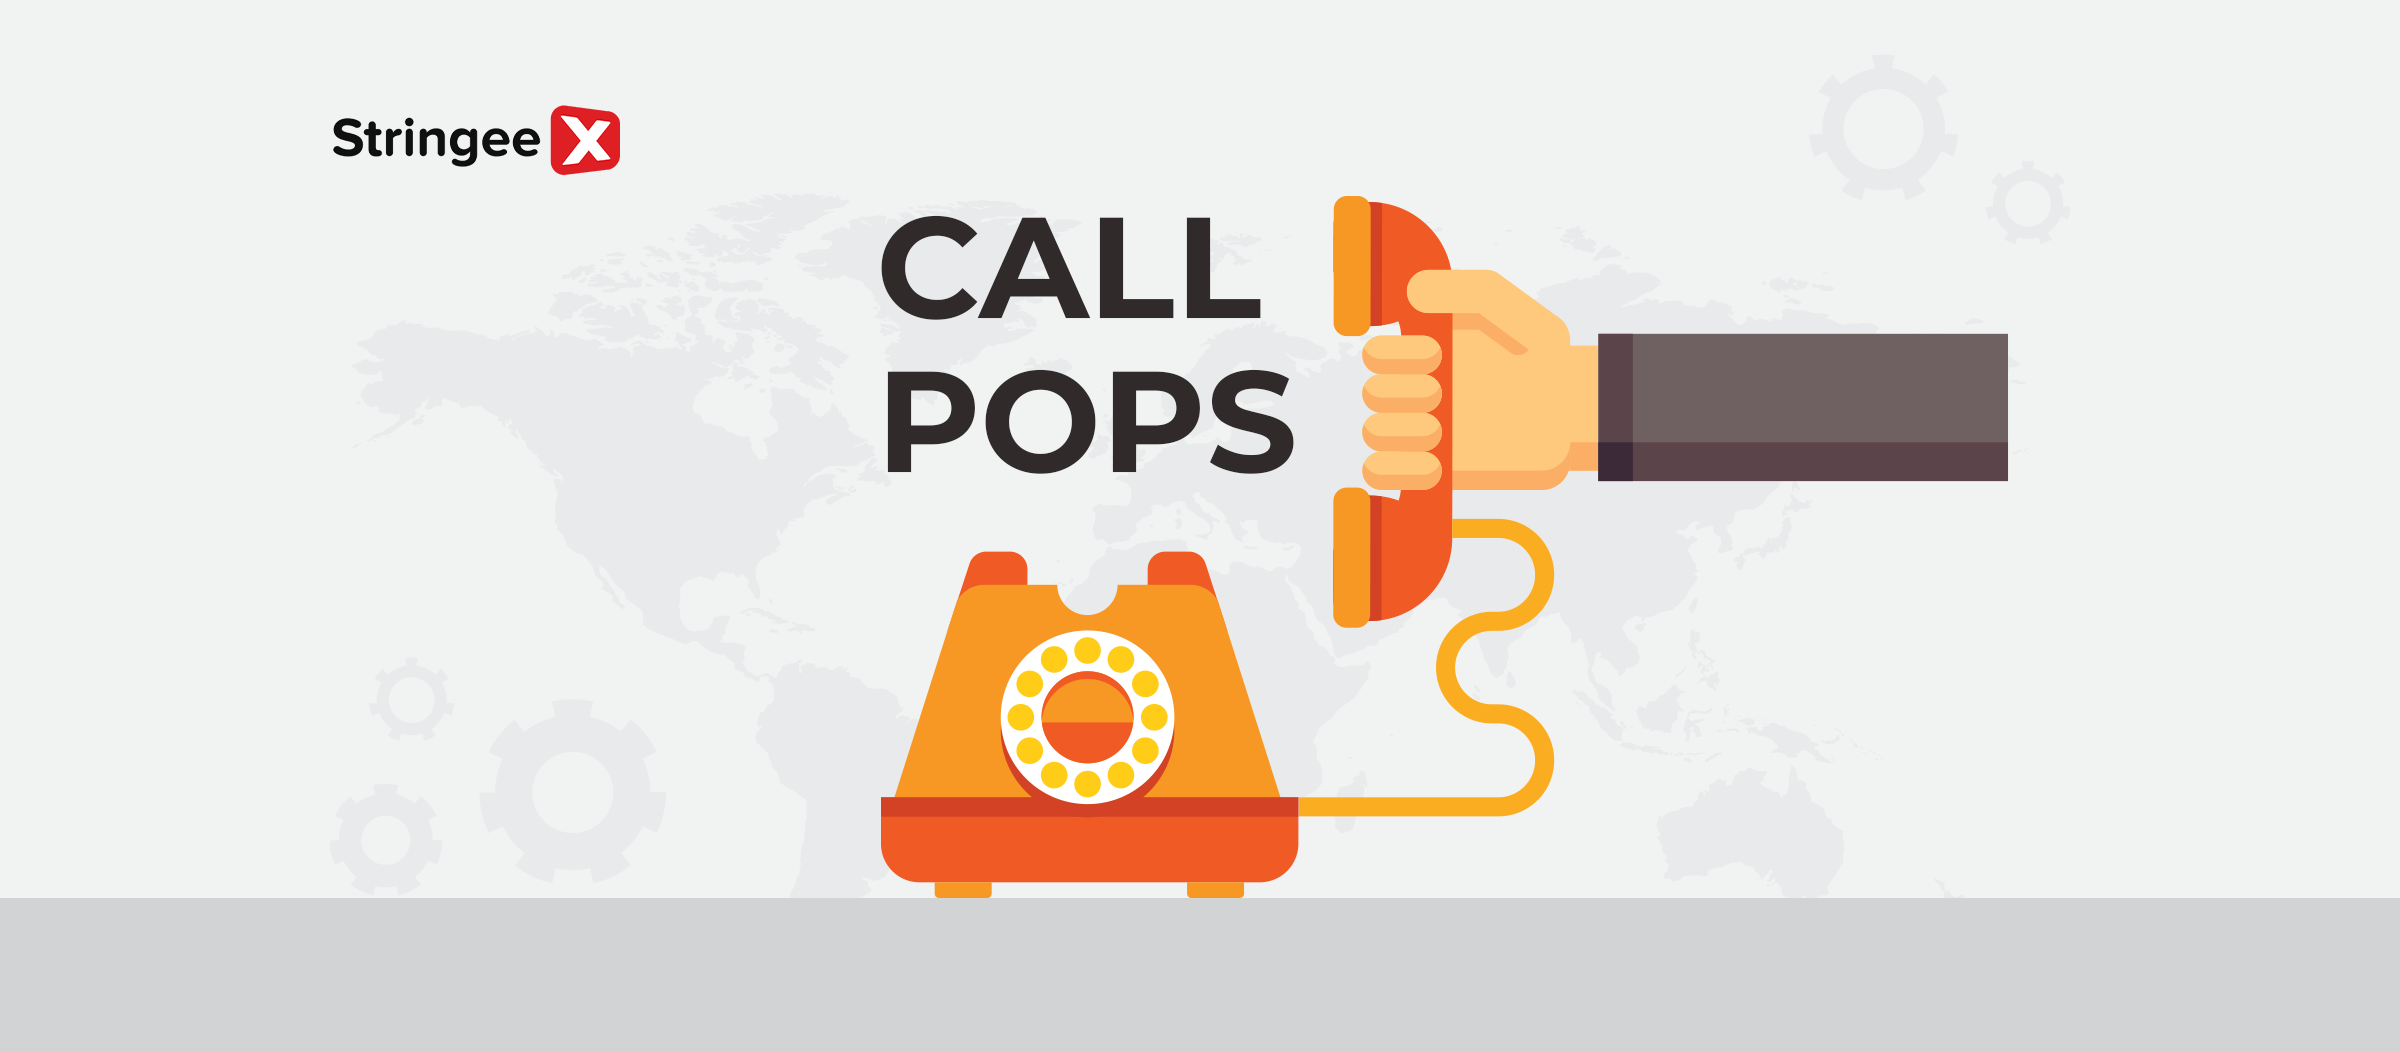 Call Pops: Features, Benefits, Usage Tips, And More